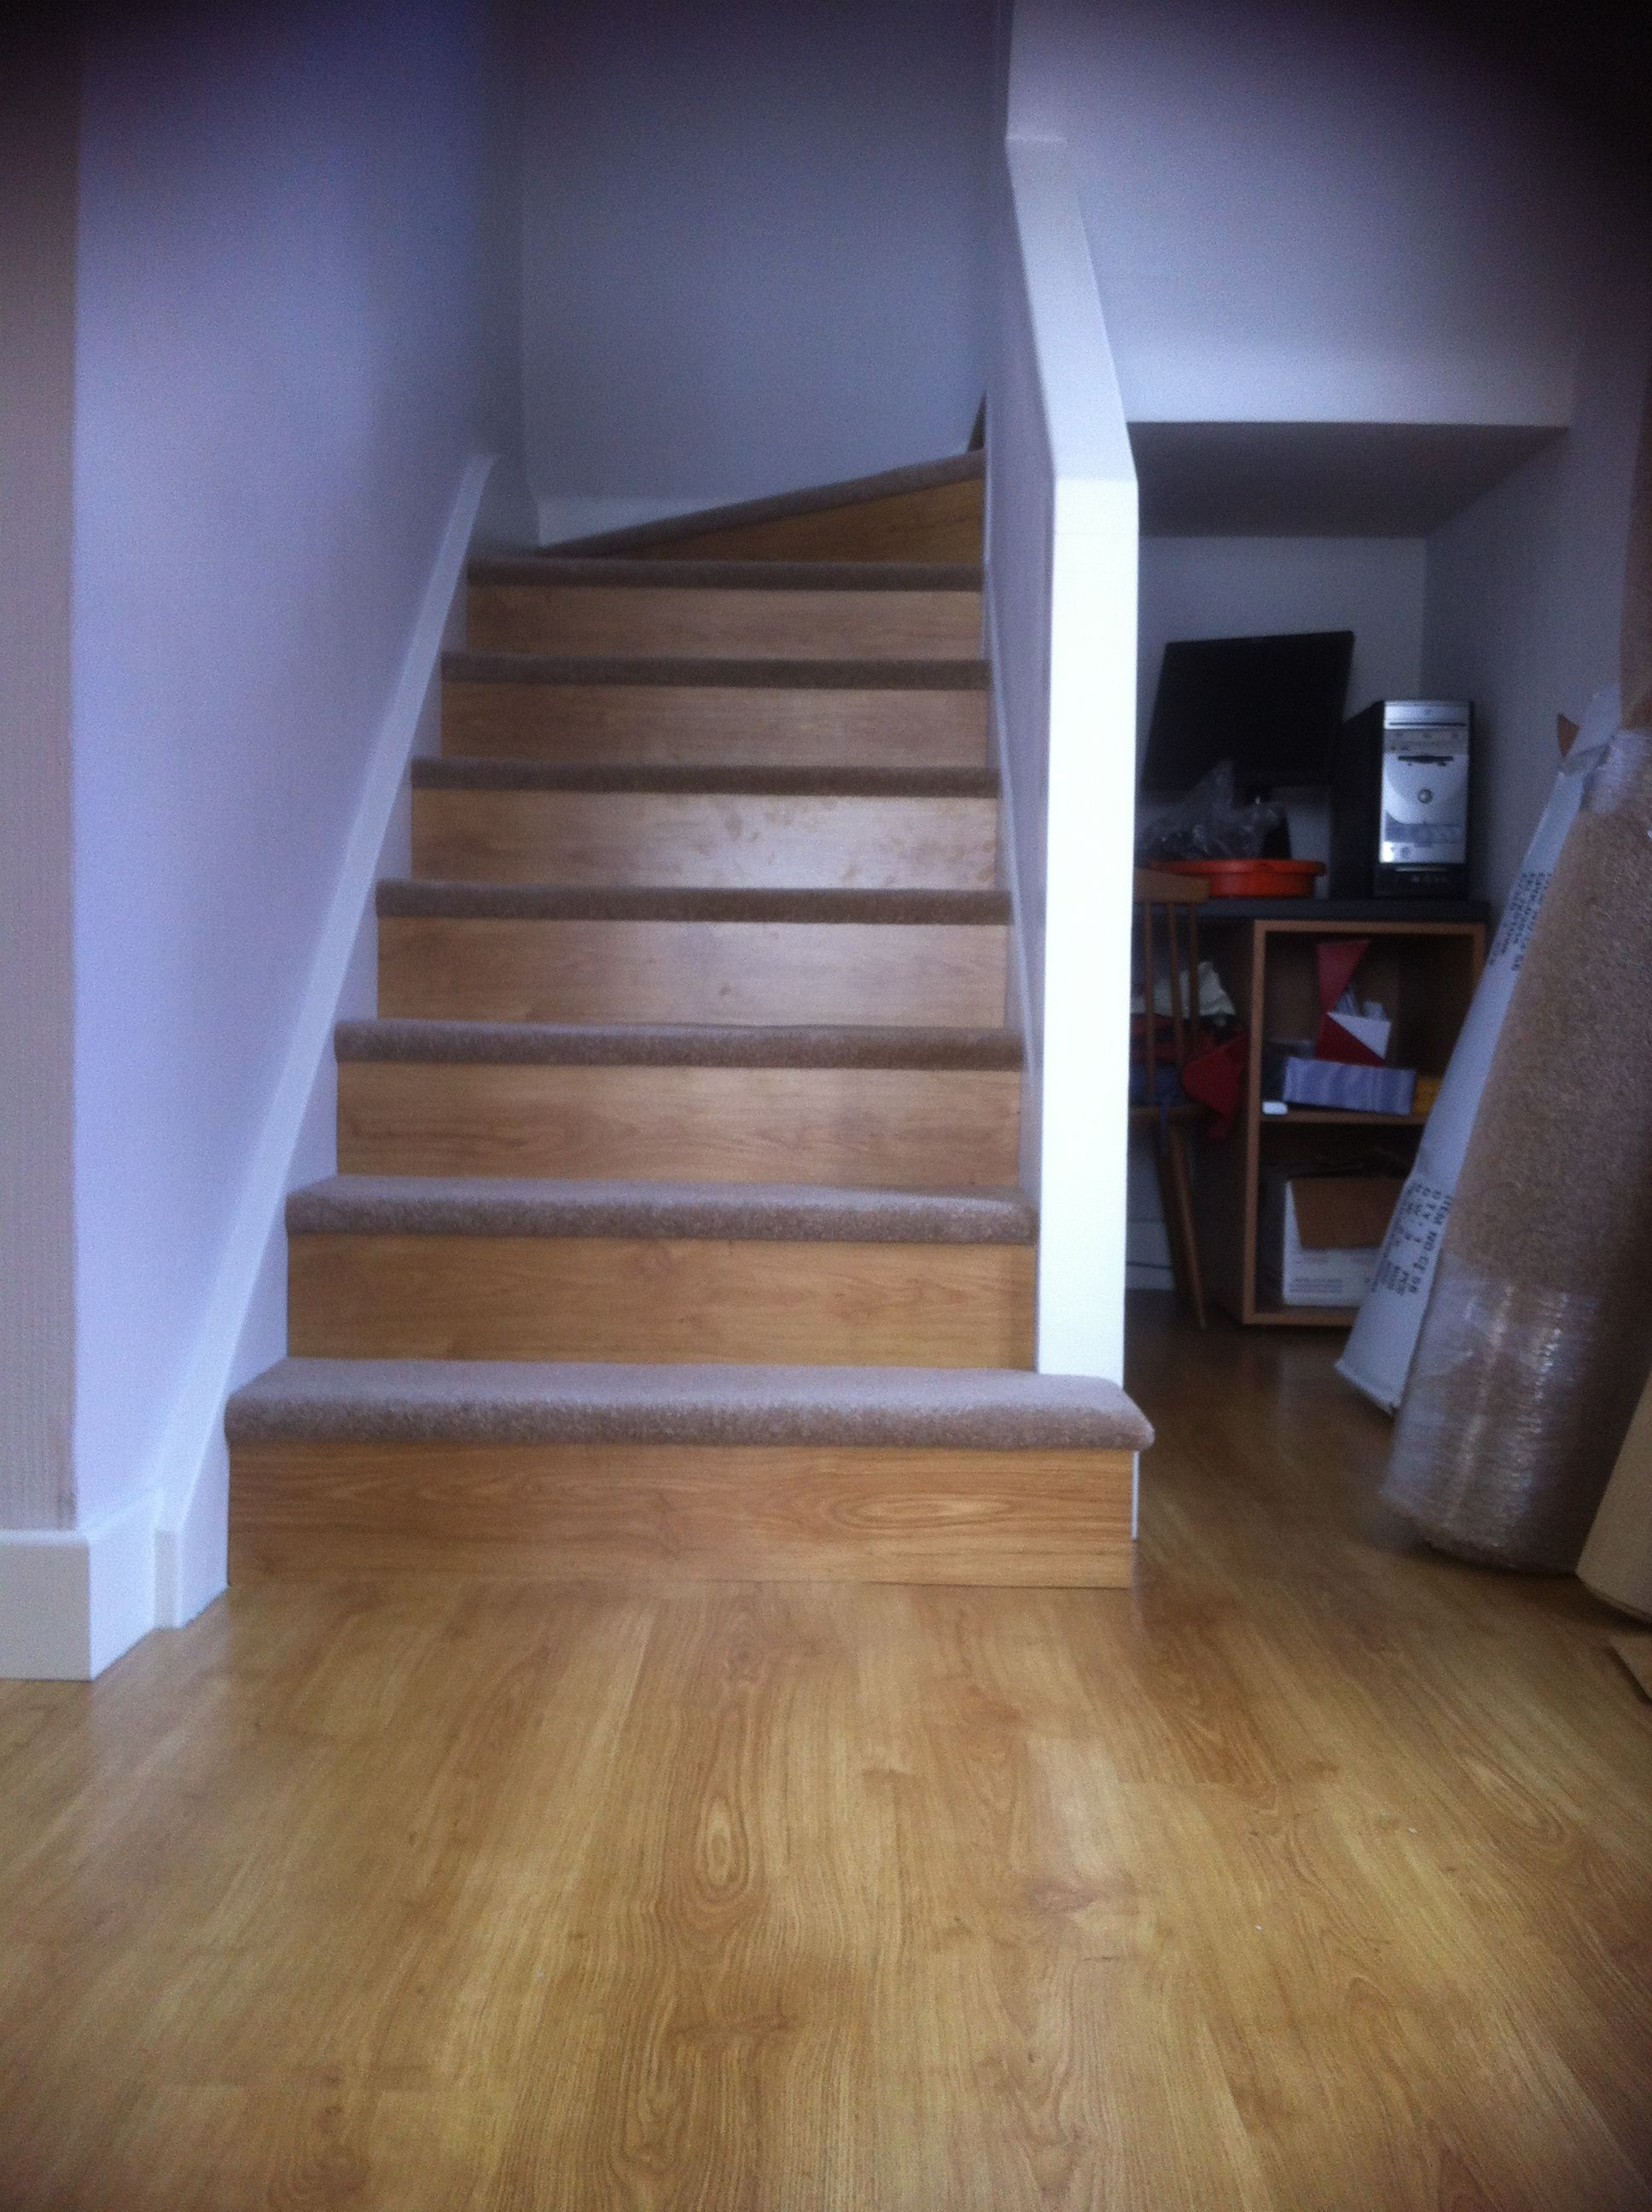 24 Wonderful Hardwood Flooring Sale In Mississauga 2022 free download hardwood flooring sale in mississauga of our diy staircase using leftover laminate flooring on the risers with regard to our diy staircase using leftover laminate flooring on the risers carp